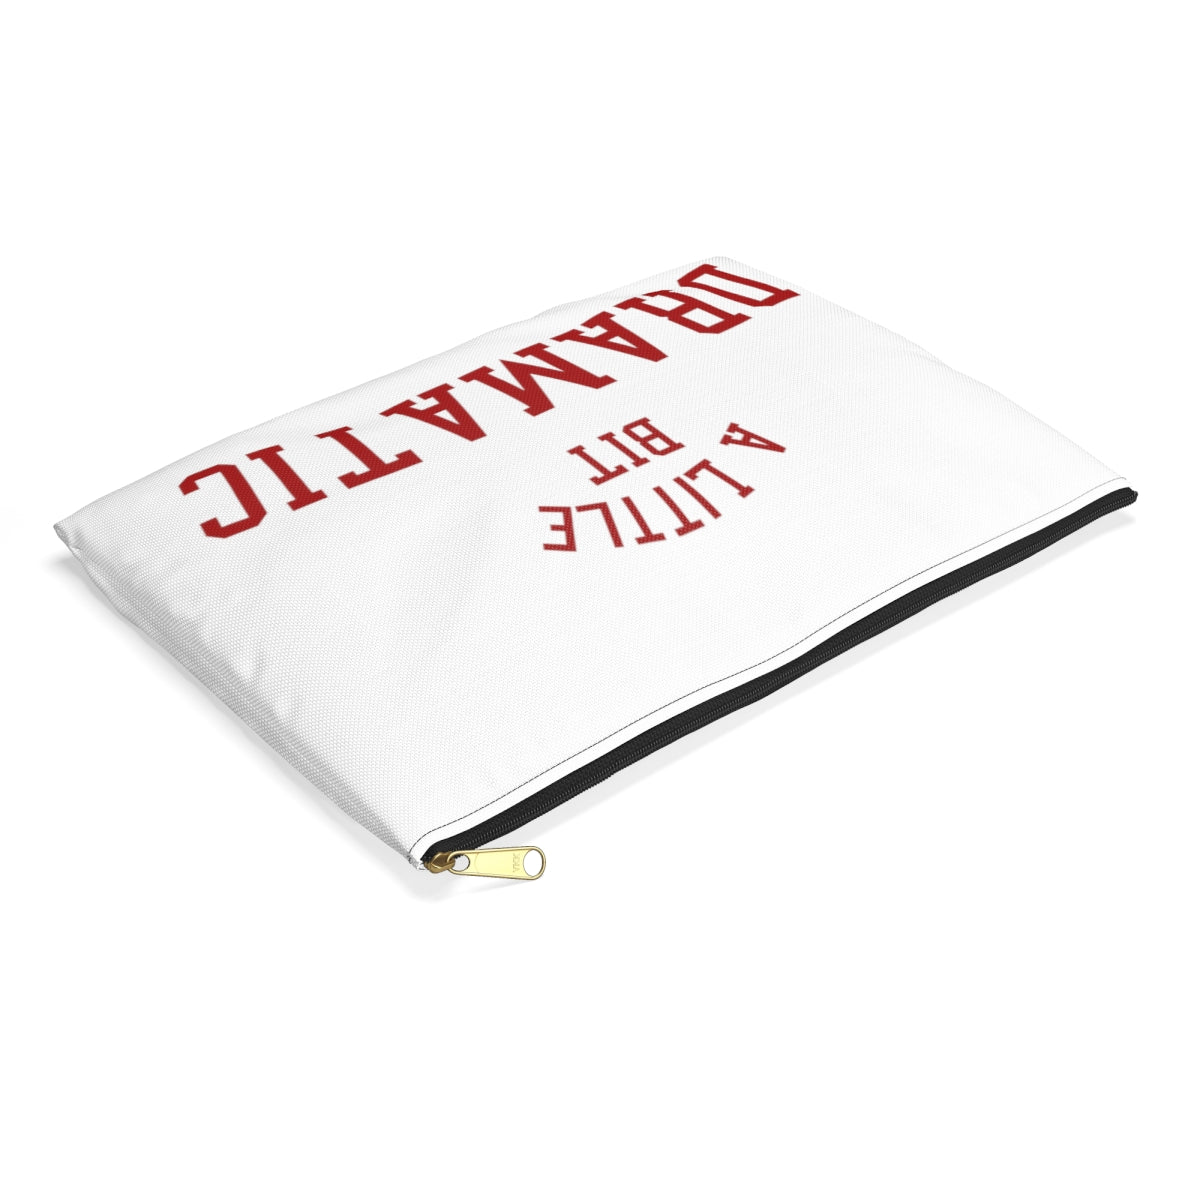 A Little Bit Dramatic Mean Girls Accessory Pouch